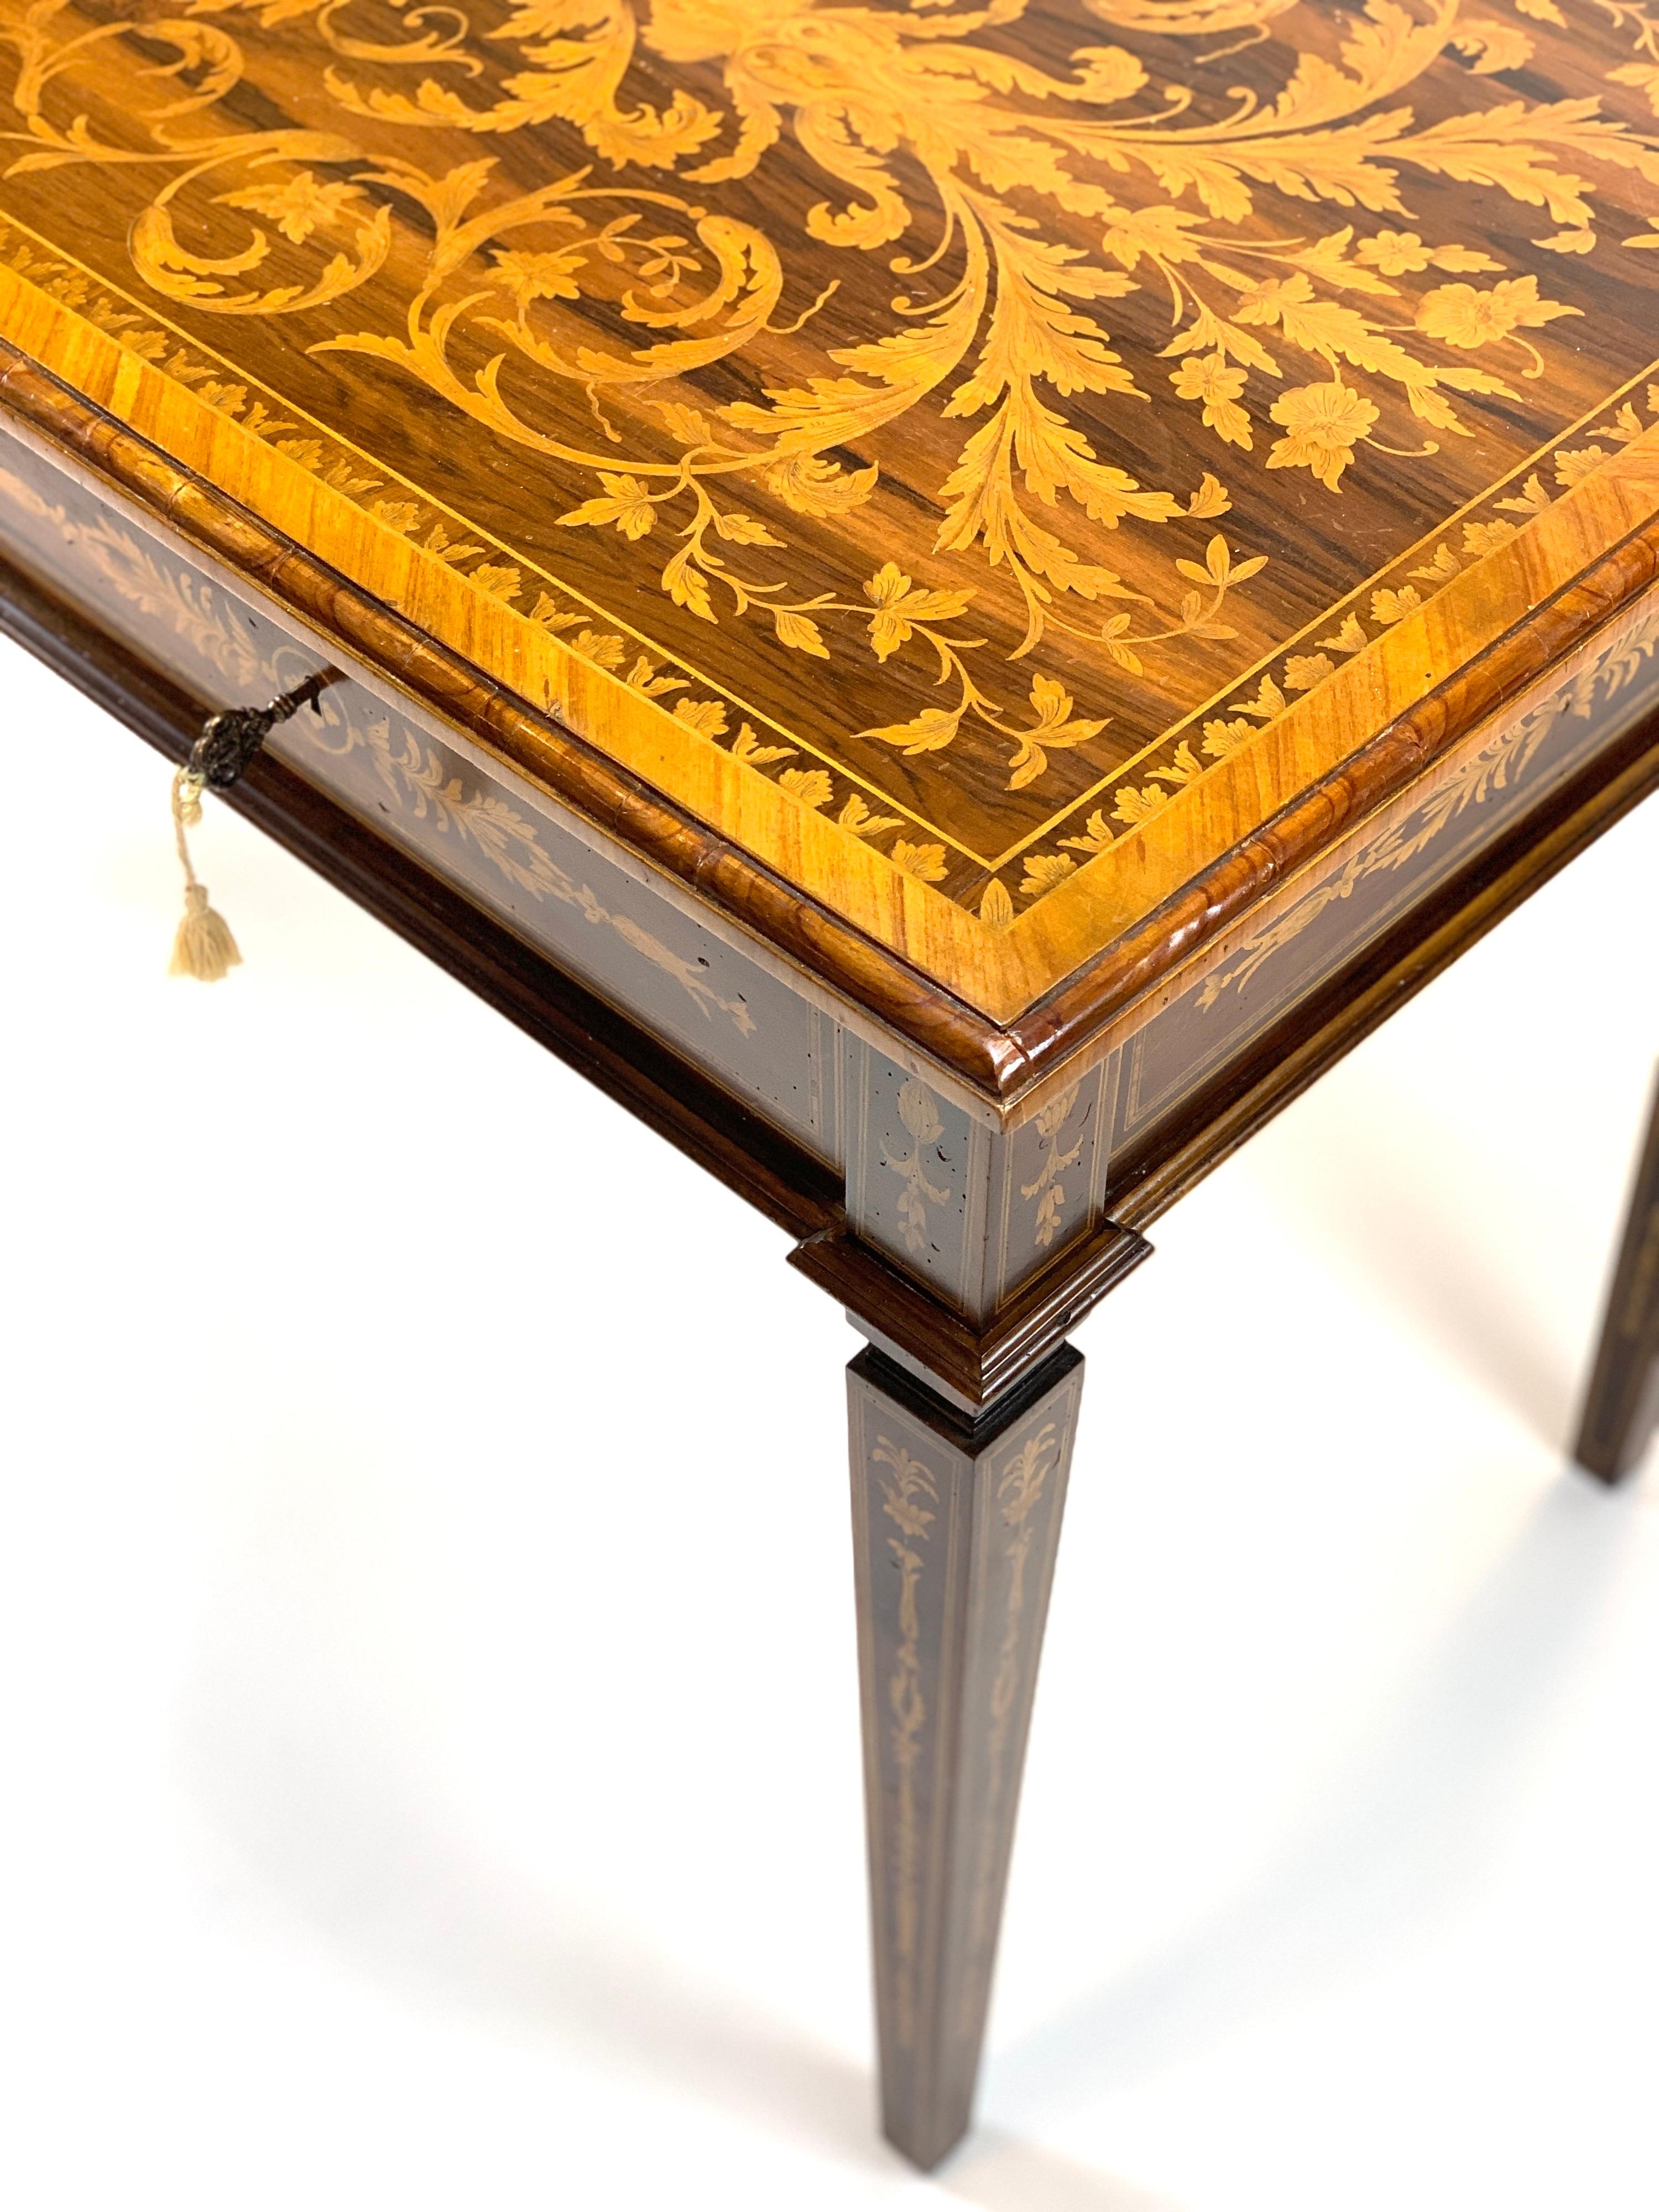 Extraordinarily detailed 19th century handcrafted writer's desk with exceptional floral marquetry inlay. Intricate tapering legs leading to the top with locking drawers and original key.